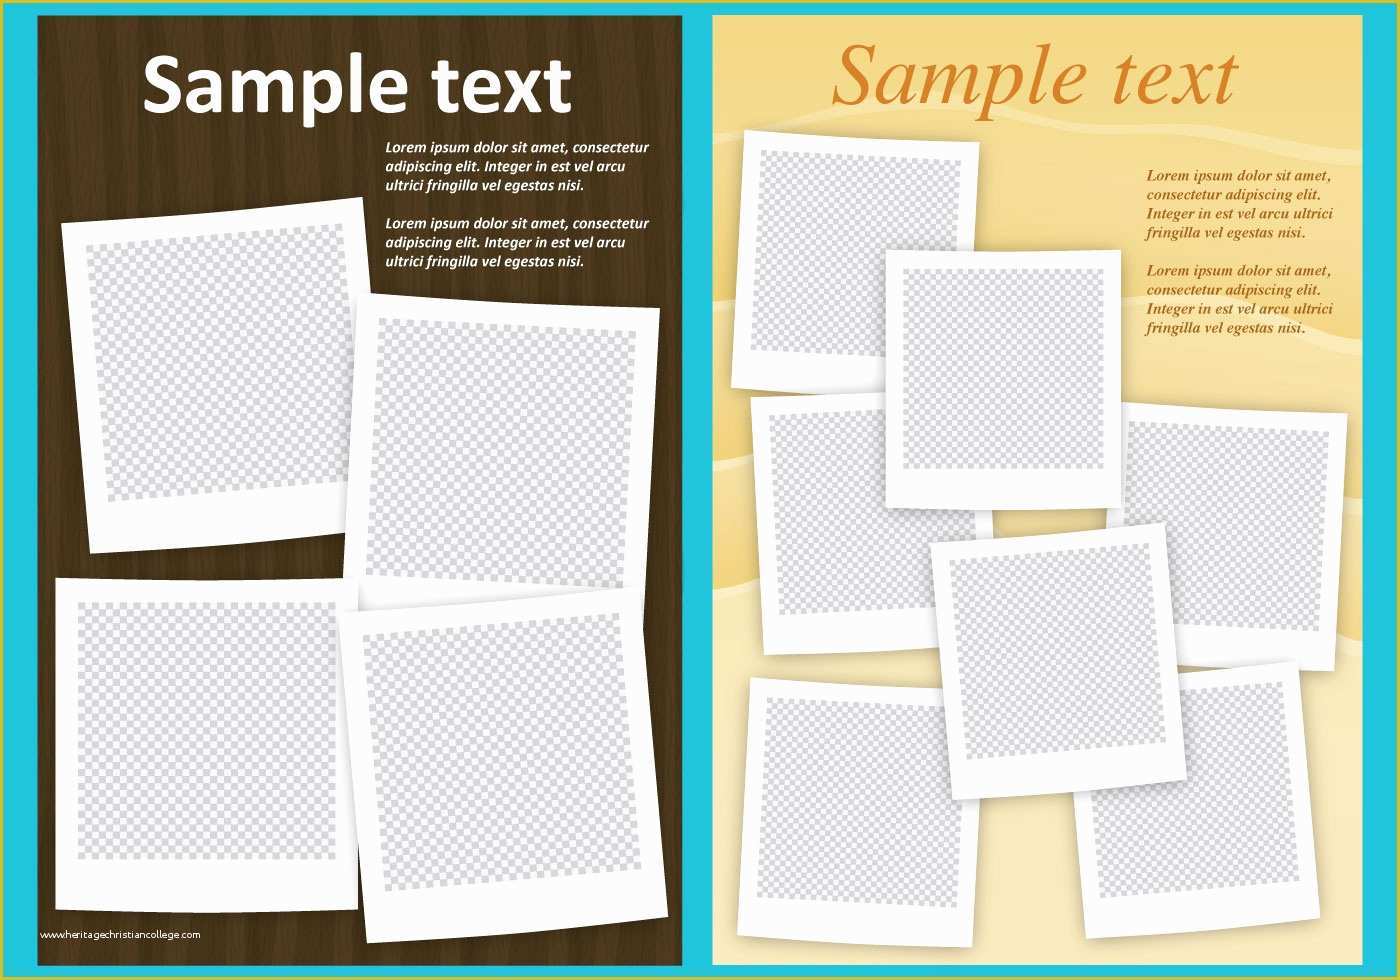 Free Photo Templates Of Collage Templates Download Free Vector Art Stock